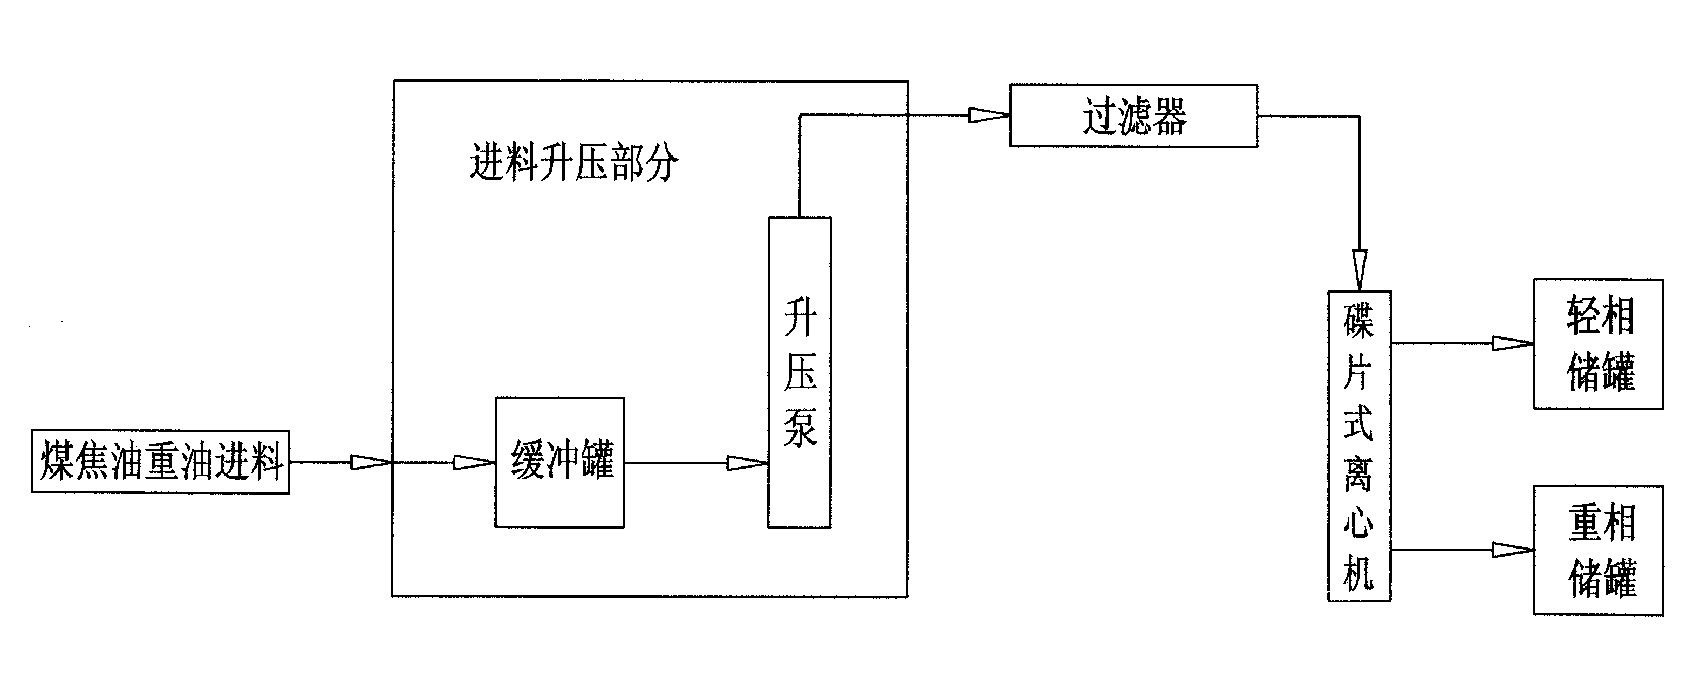 Method for removing impurities from coal tar heavy oil